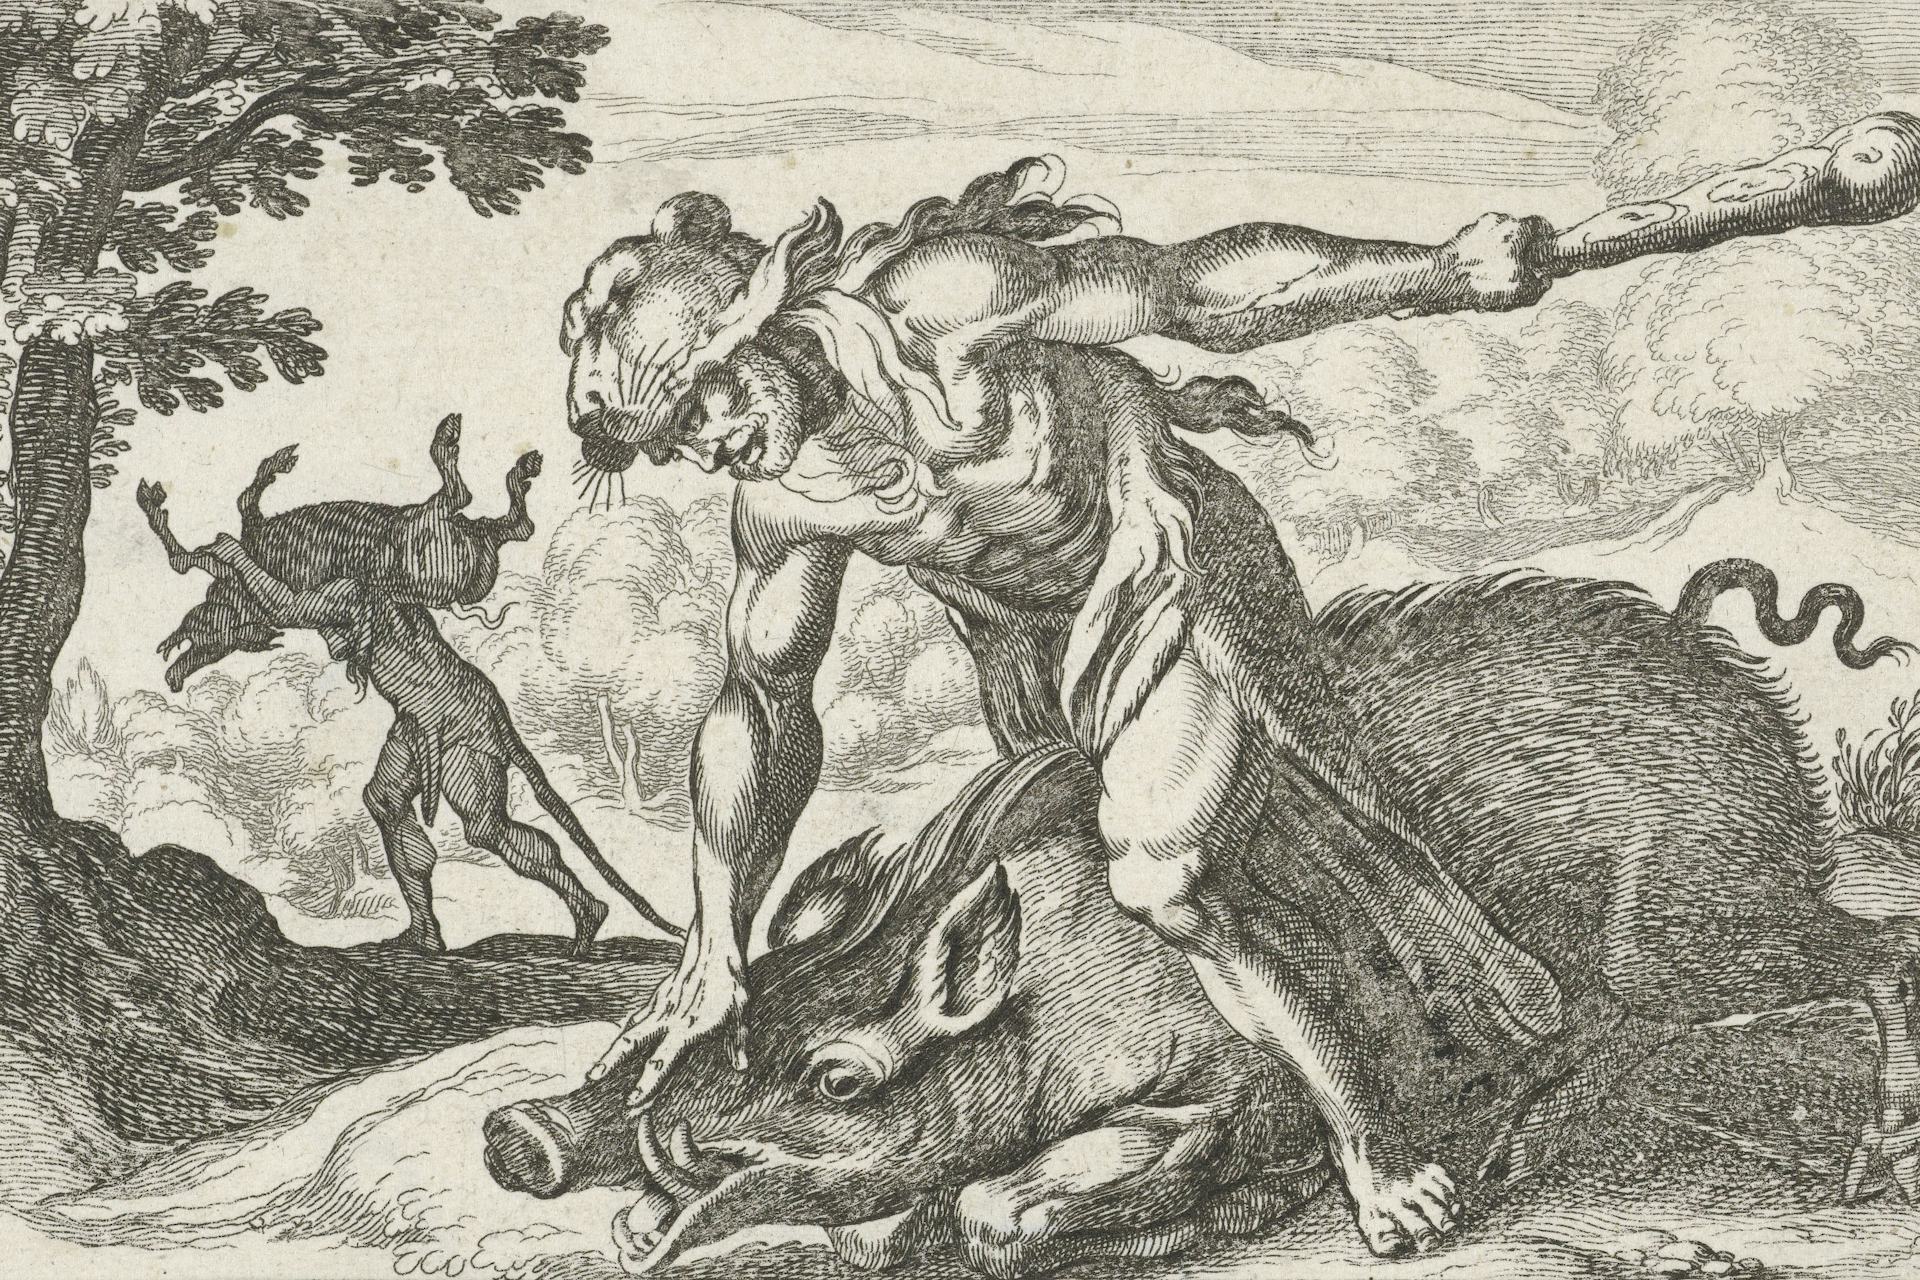 Hercules catching the boar of Erymanthus by Simon Frisius, after Antonio Tempesta (ca. 1610–64)